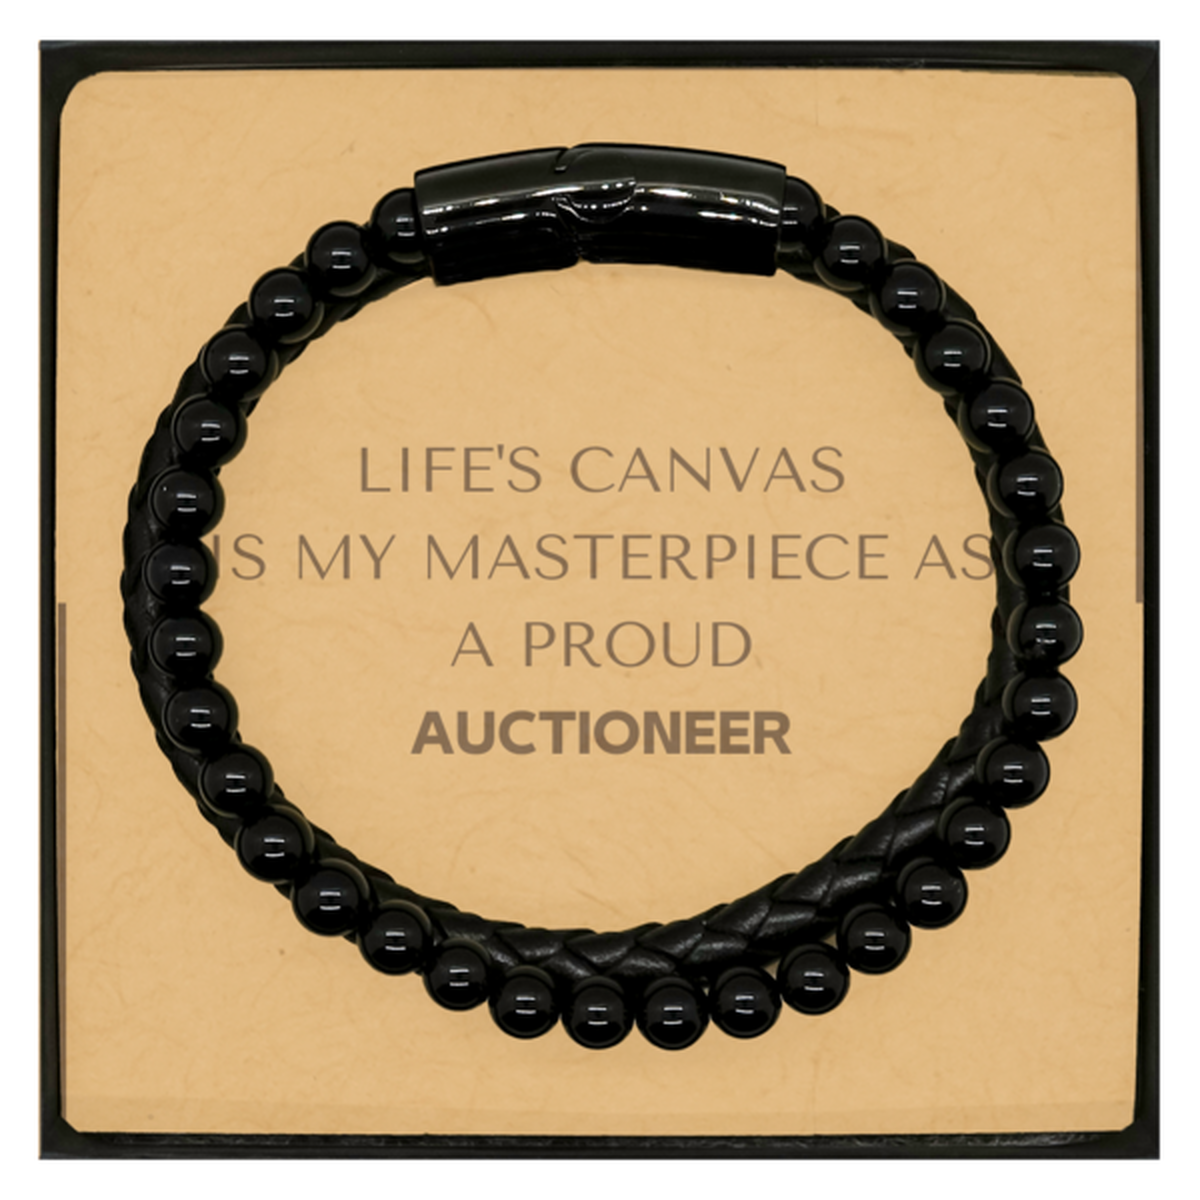 Proud Auctioneer Gifts, Life's canvas is my masterpiece, Epic Birthday Christmas Unique Stone Leather Bracelets For Auctioneer, Coworkers, Men, Women, Friends